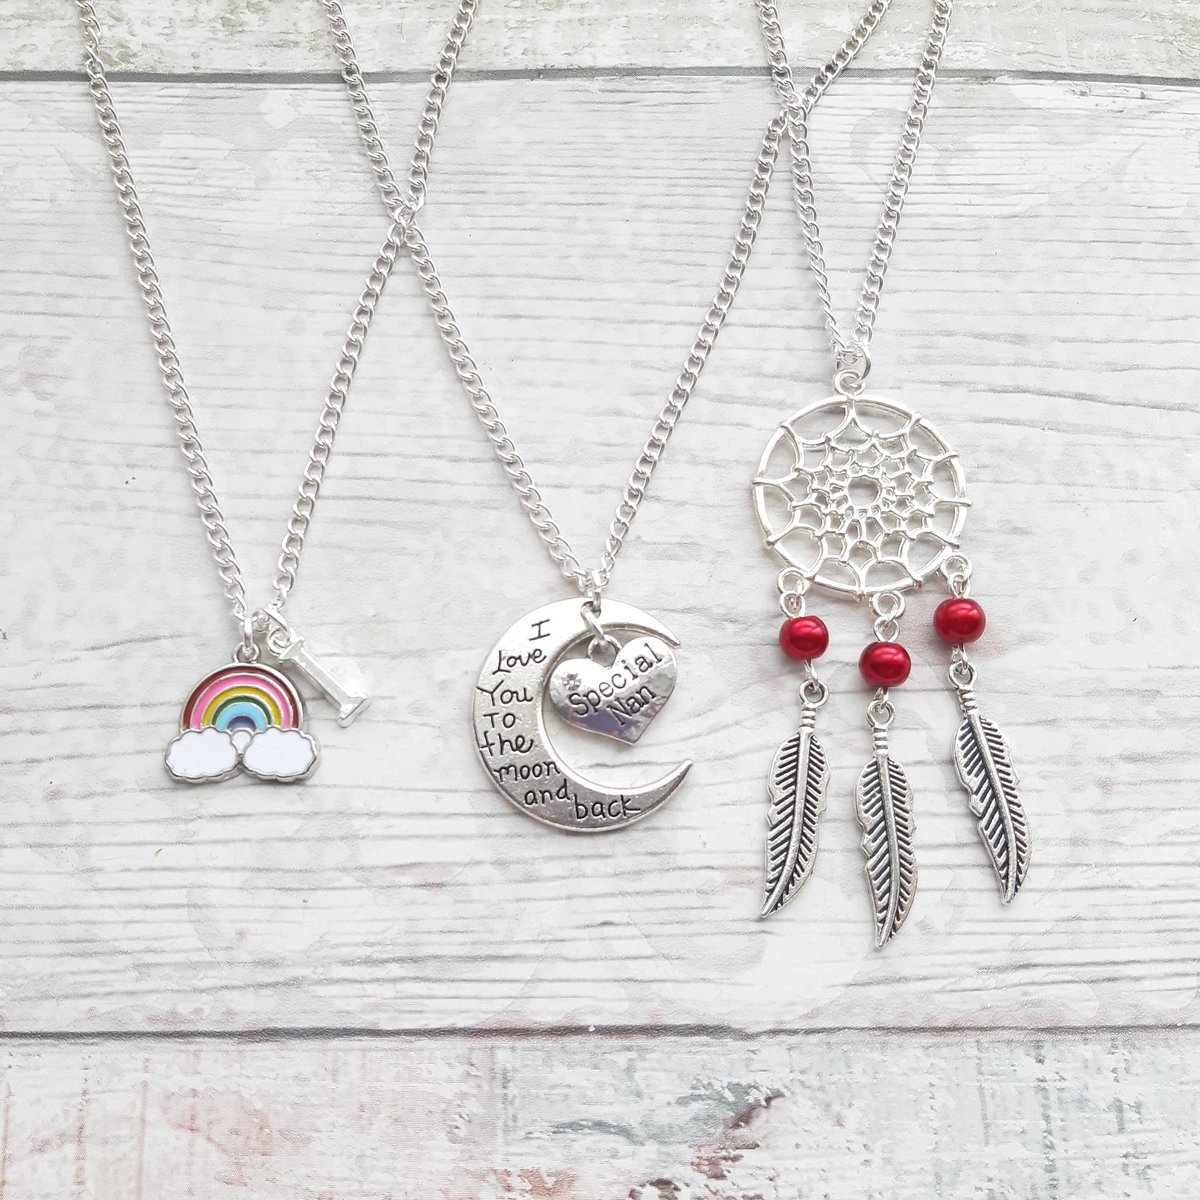 cute necklaces perfect to send to family and friends
#rainbow #rainbowlover #rainbownecklace #rainbowpresent  #rainbowjewellery #dreamcatcher #dreamcatchernecklace #dreamcatcherjewellery #moonnecklace #loveyoutothemoonandback #loveyoujewellery #birthdaygift #missyou #missyougift